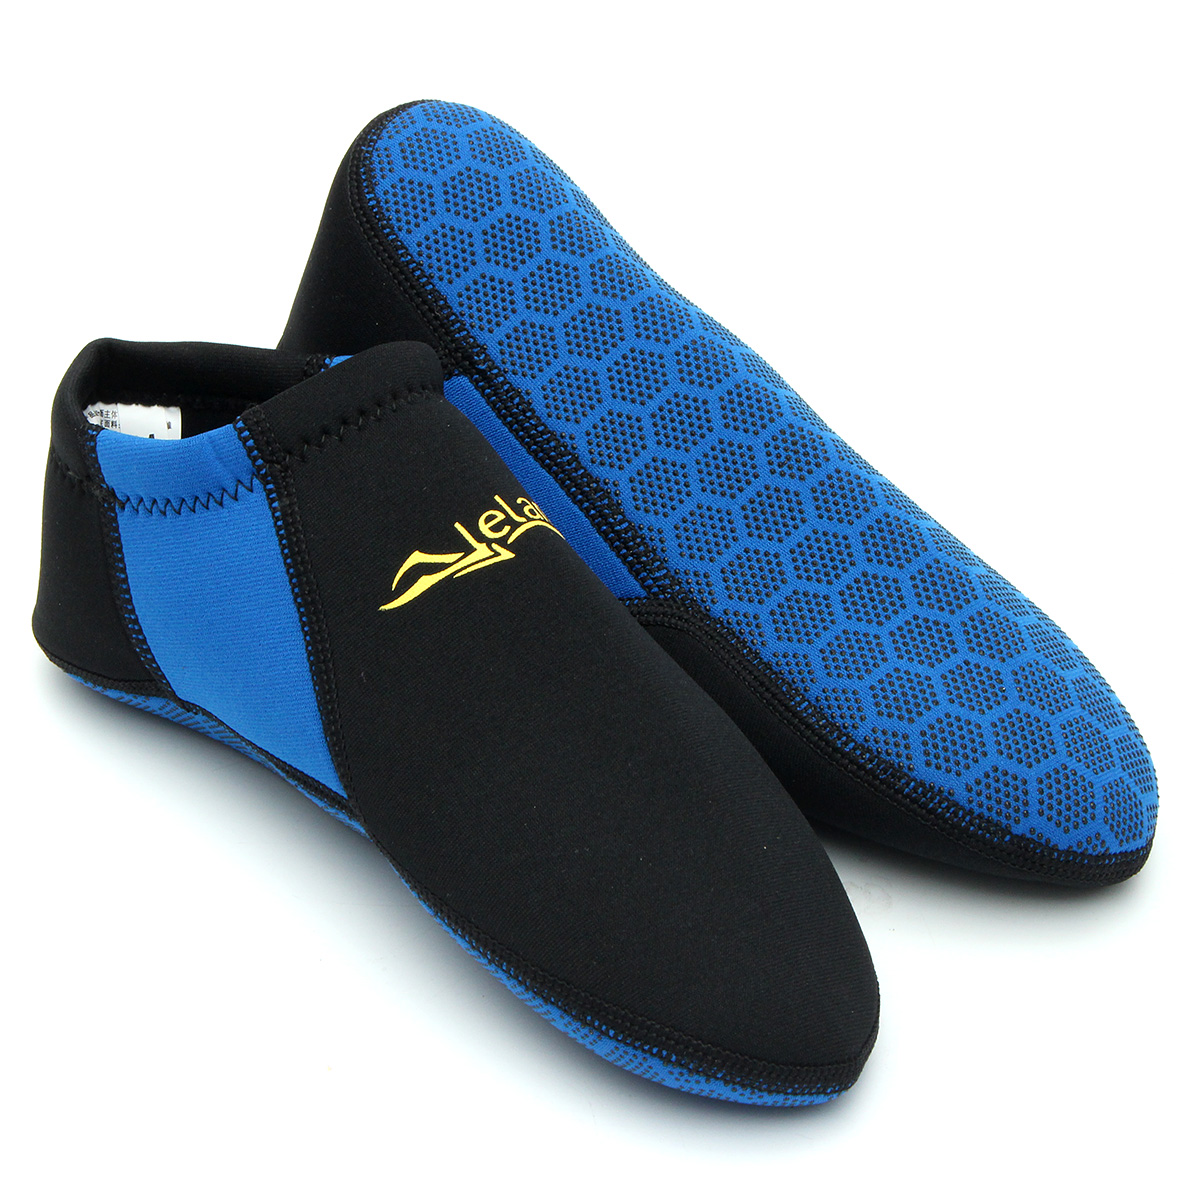 Outdoor-Swimming-Snorkel-Socks-Soft-Beach-Shoes-Water-Sport-Scuba-Surf-Diving-1130872